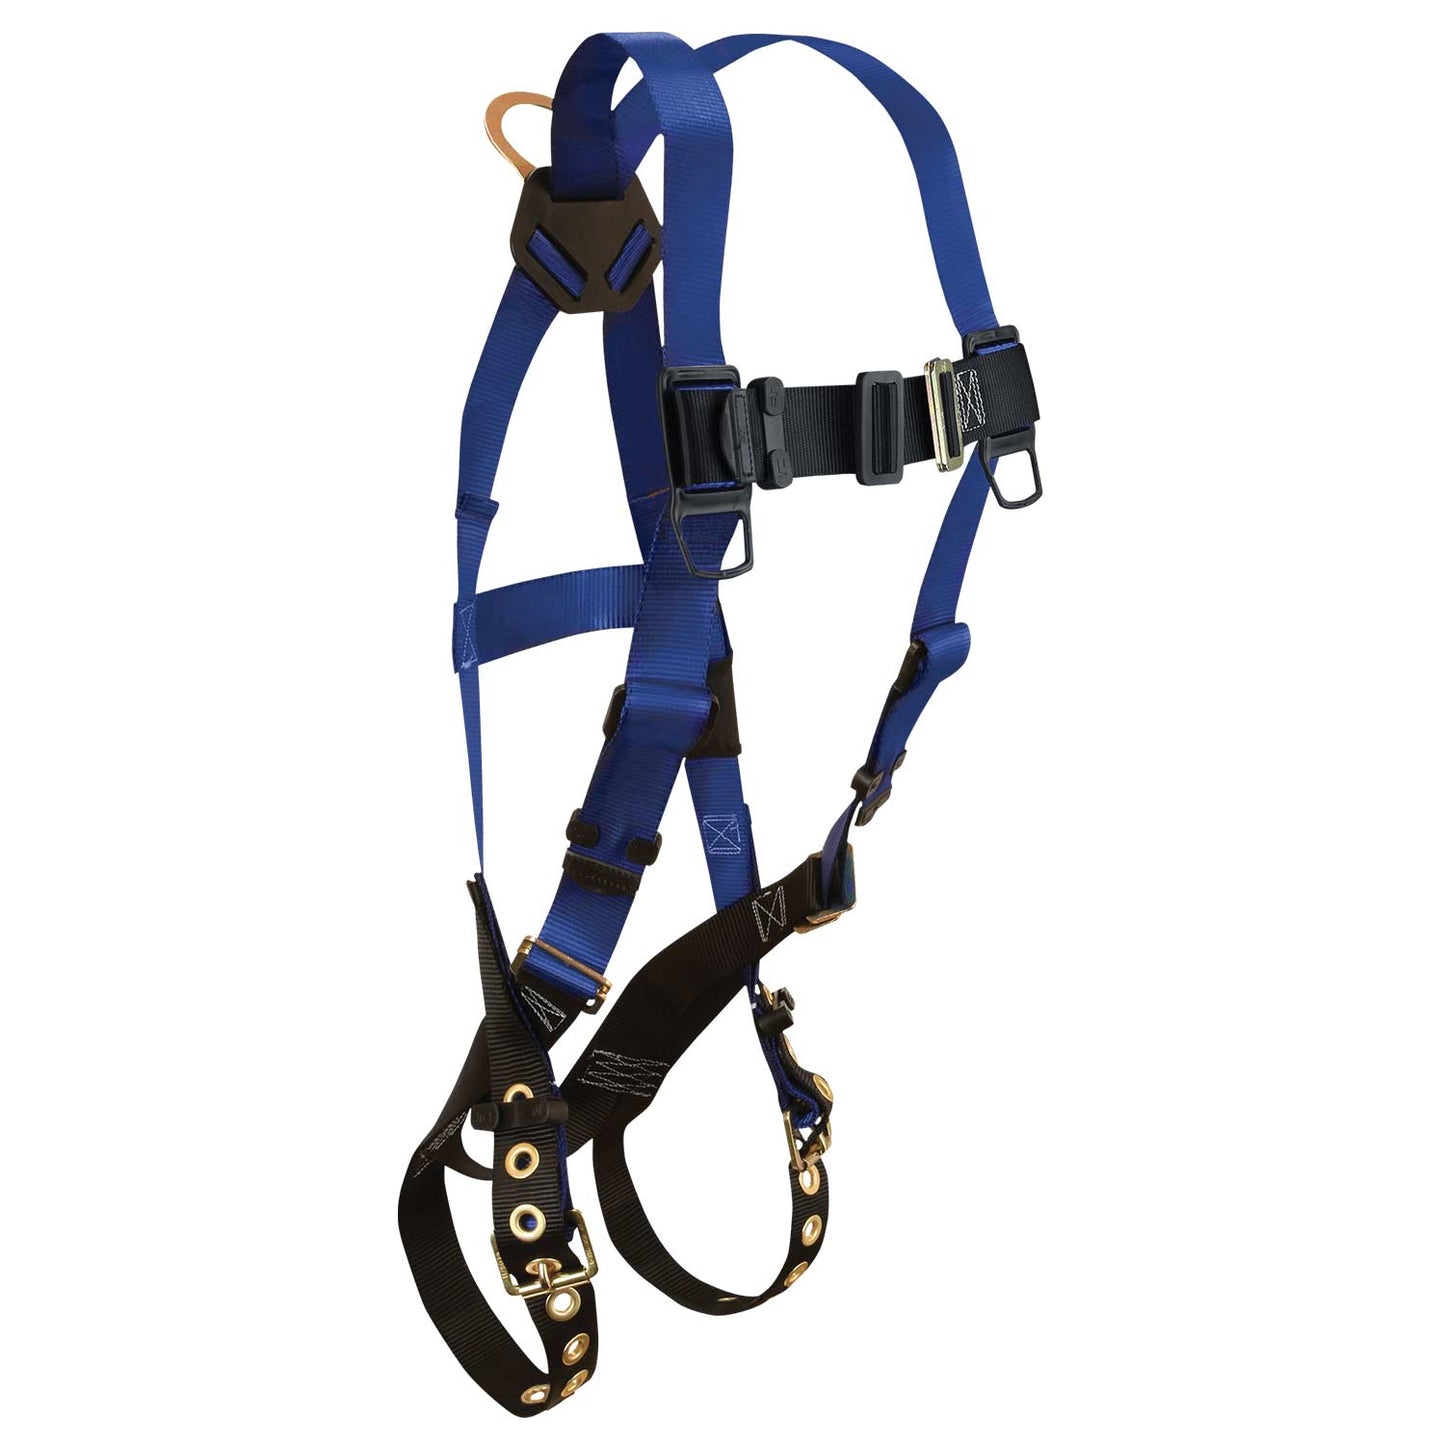 FallTech Contractor Full-Body Safety Harness | Non-Belted | XL/2XL | 7016X/2X